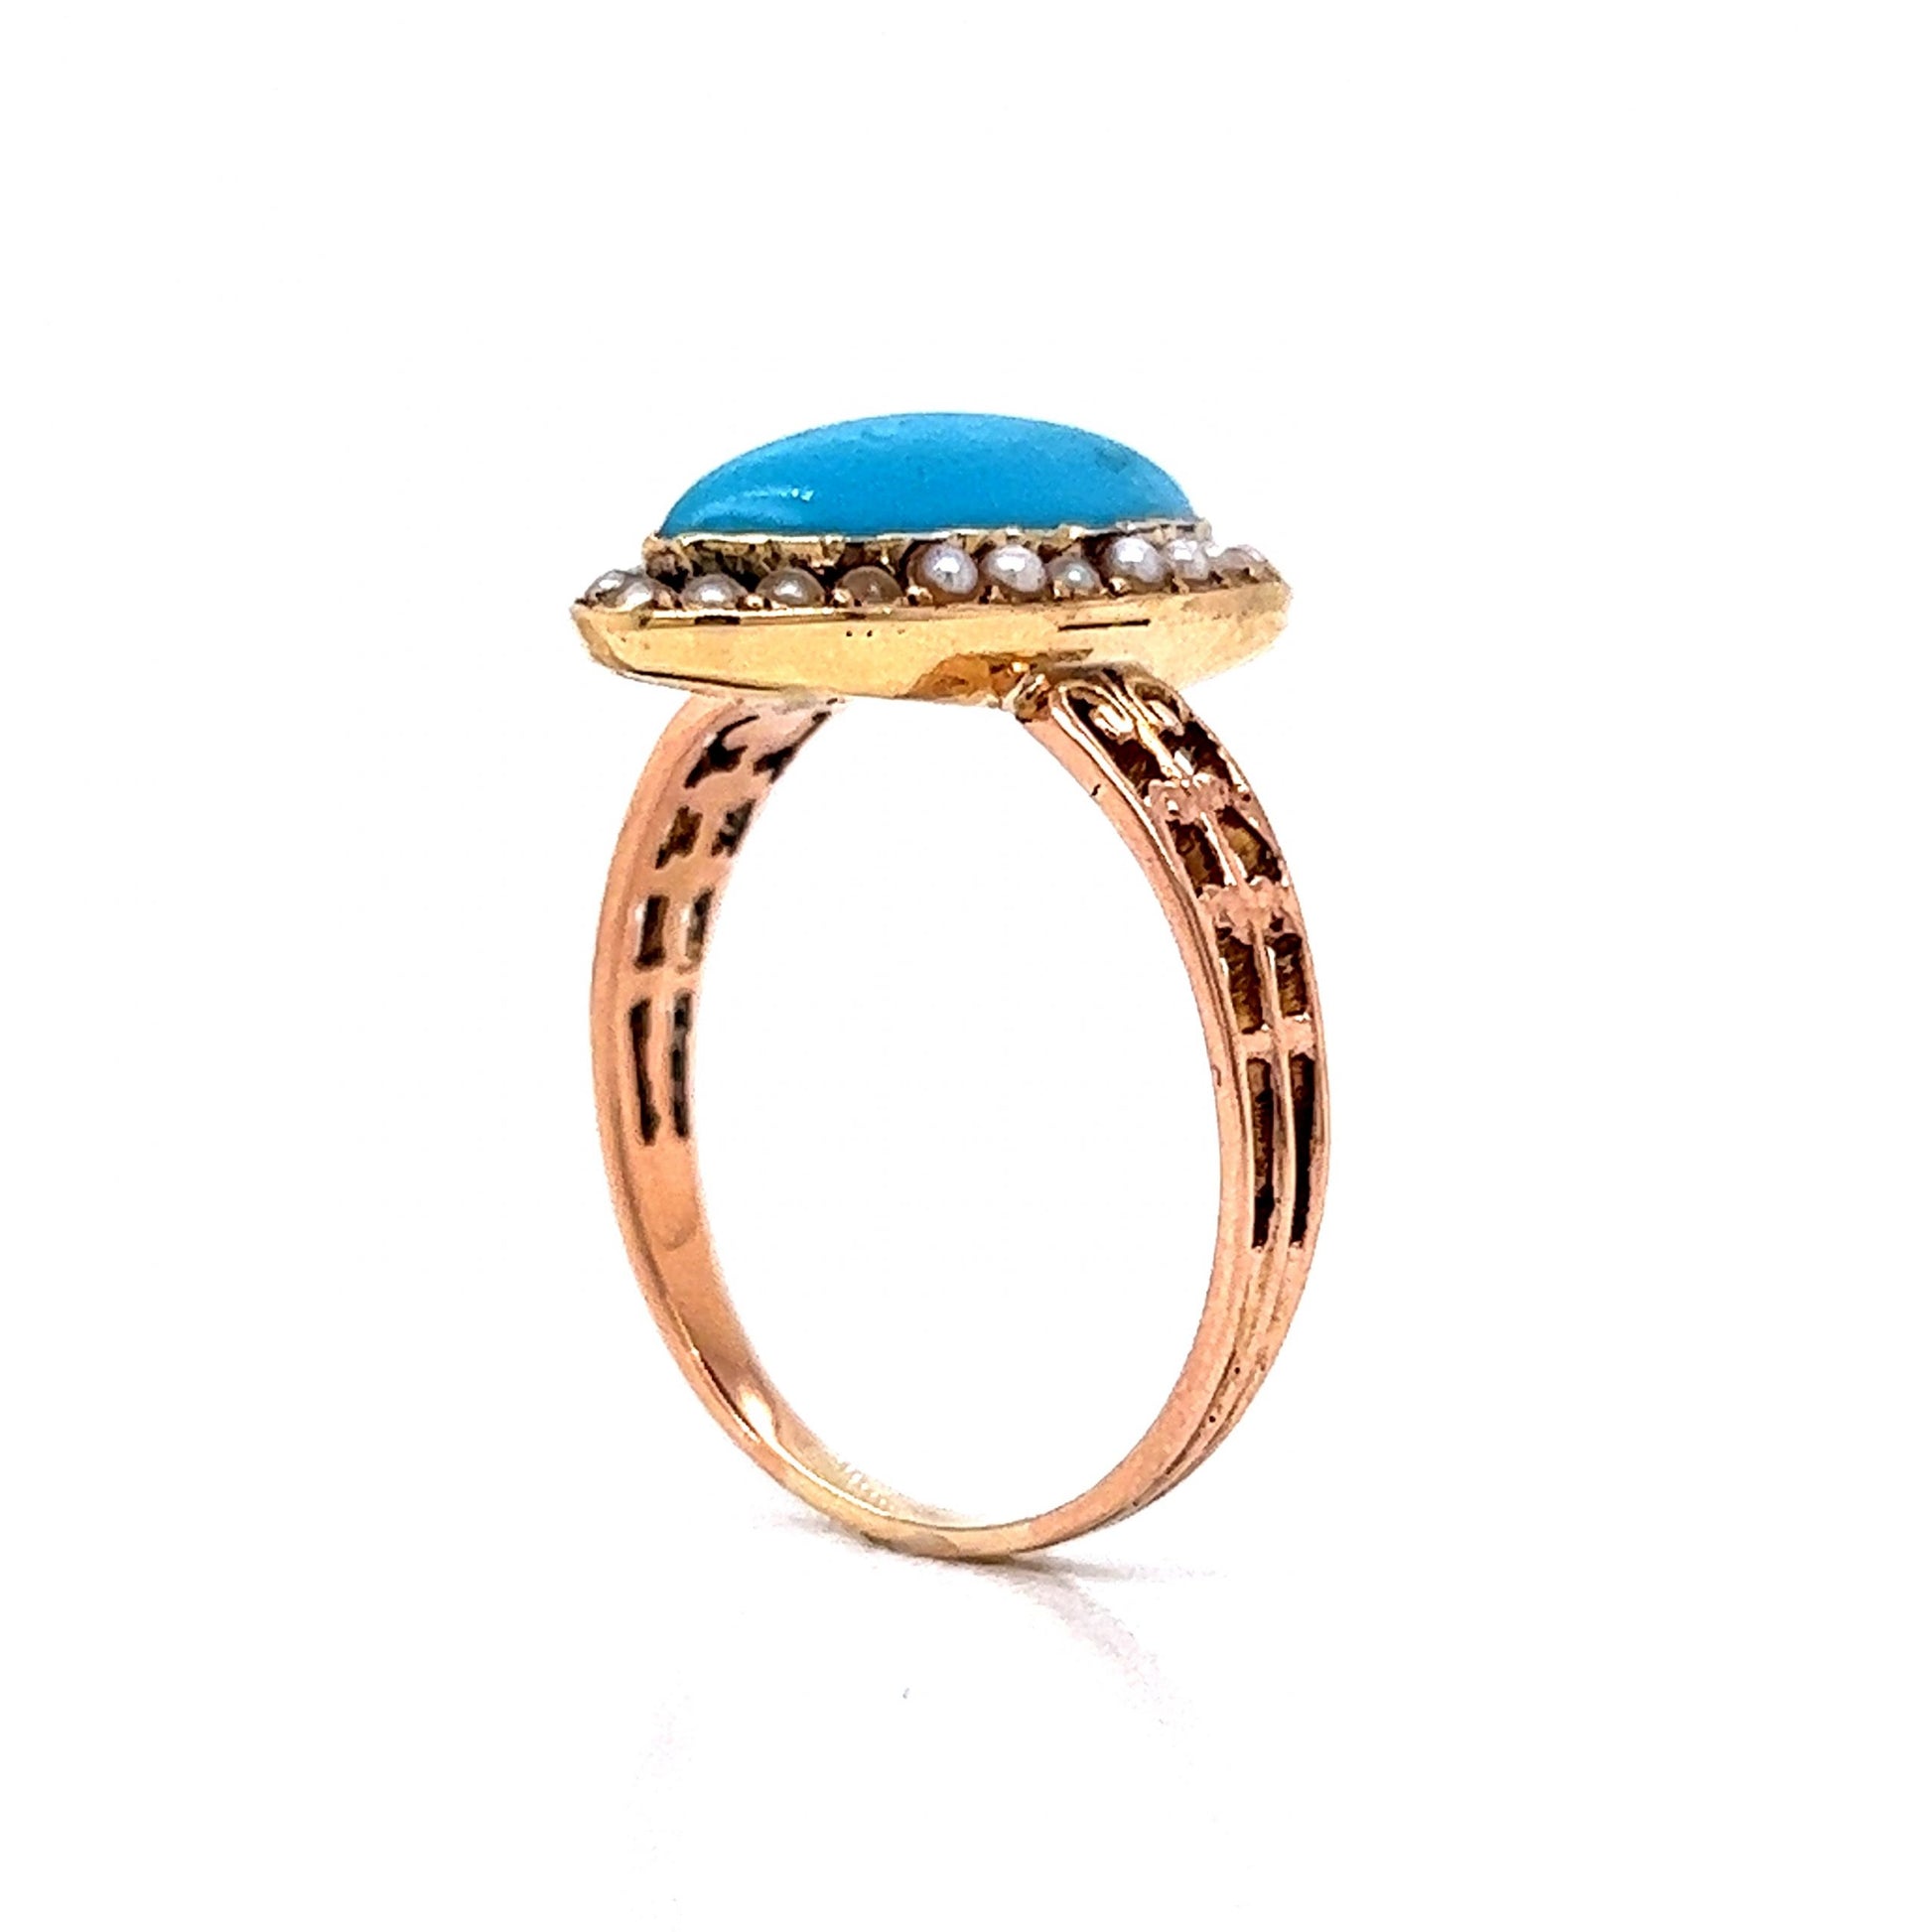 Victorian Turquoise & Seed Pearl Ring in 14k Yellow Gold